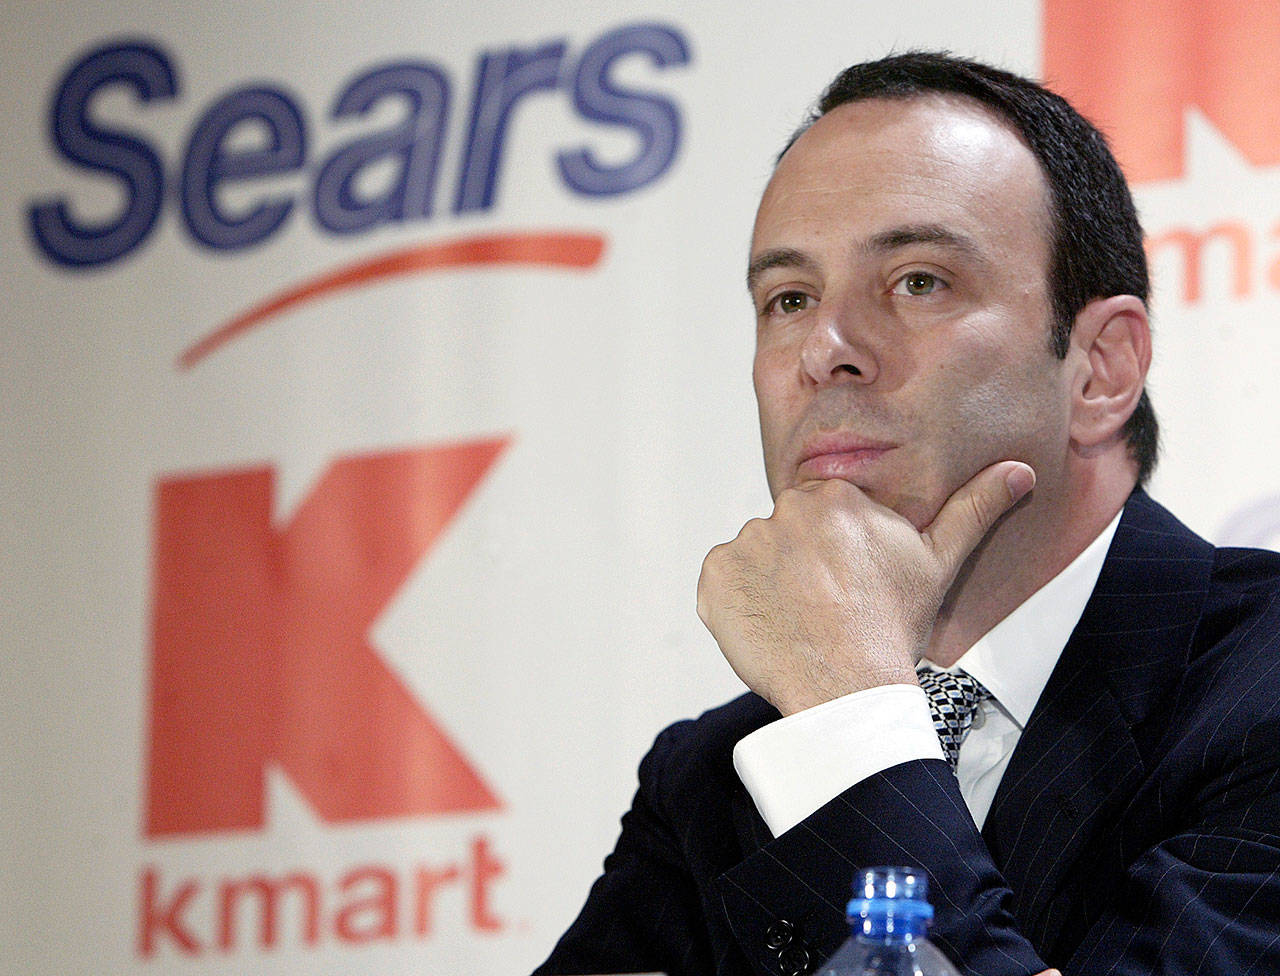 Kmart Chairman Edward Lampert listens during a news conference in 2004 in New York to announce the merger of Kmart and Sears. (Gregory Bull / AP file)